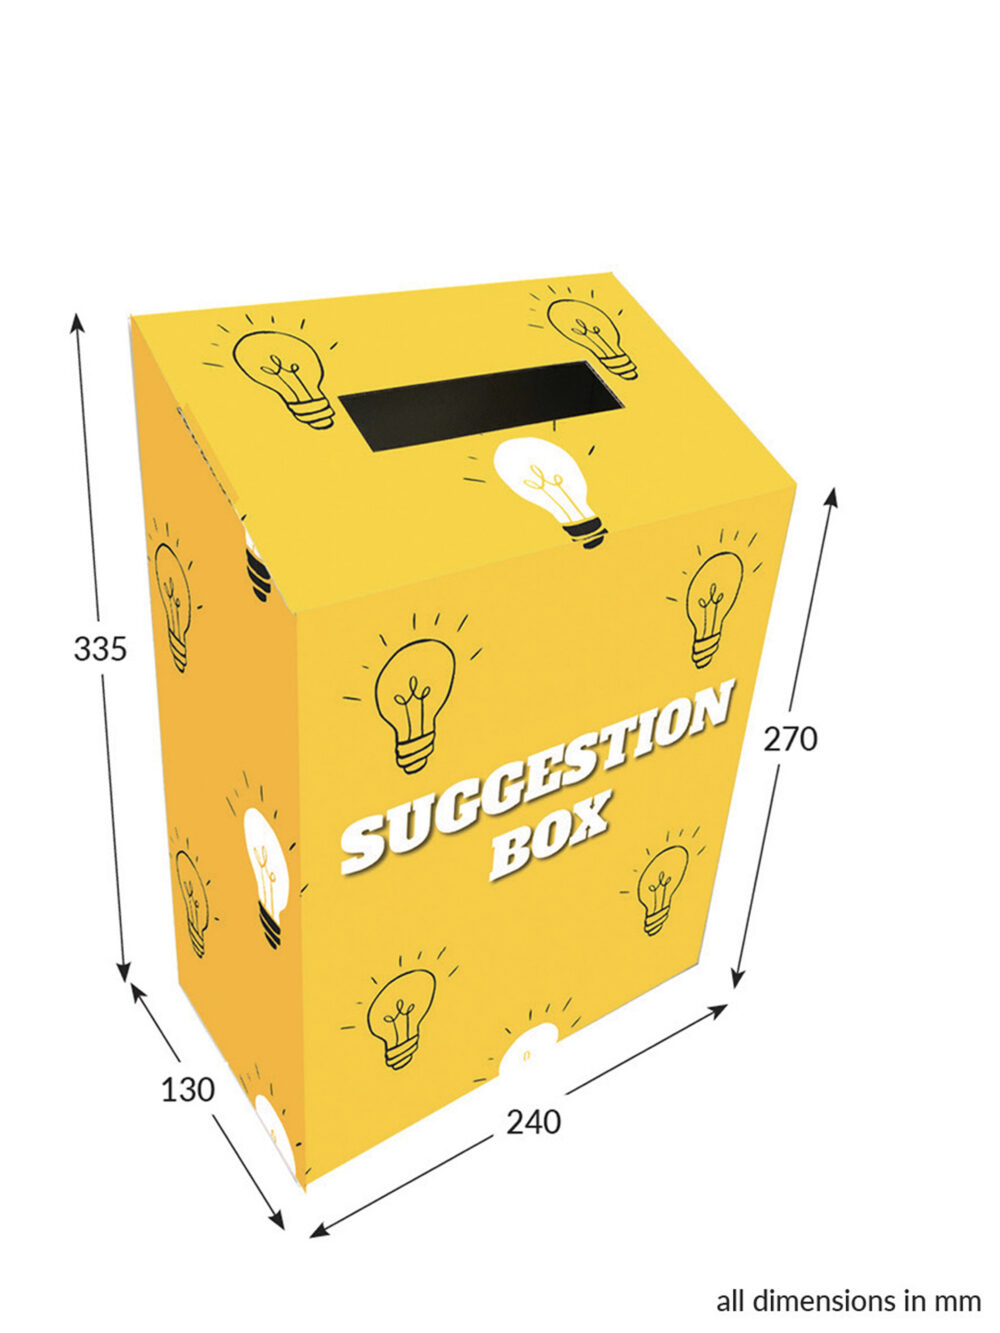 Featured image for “Ballot Box Large Angled Top - Suggestions Box”